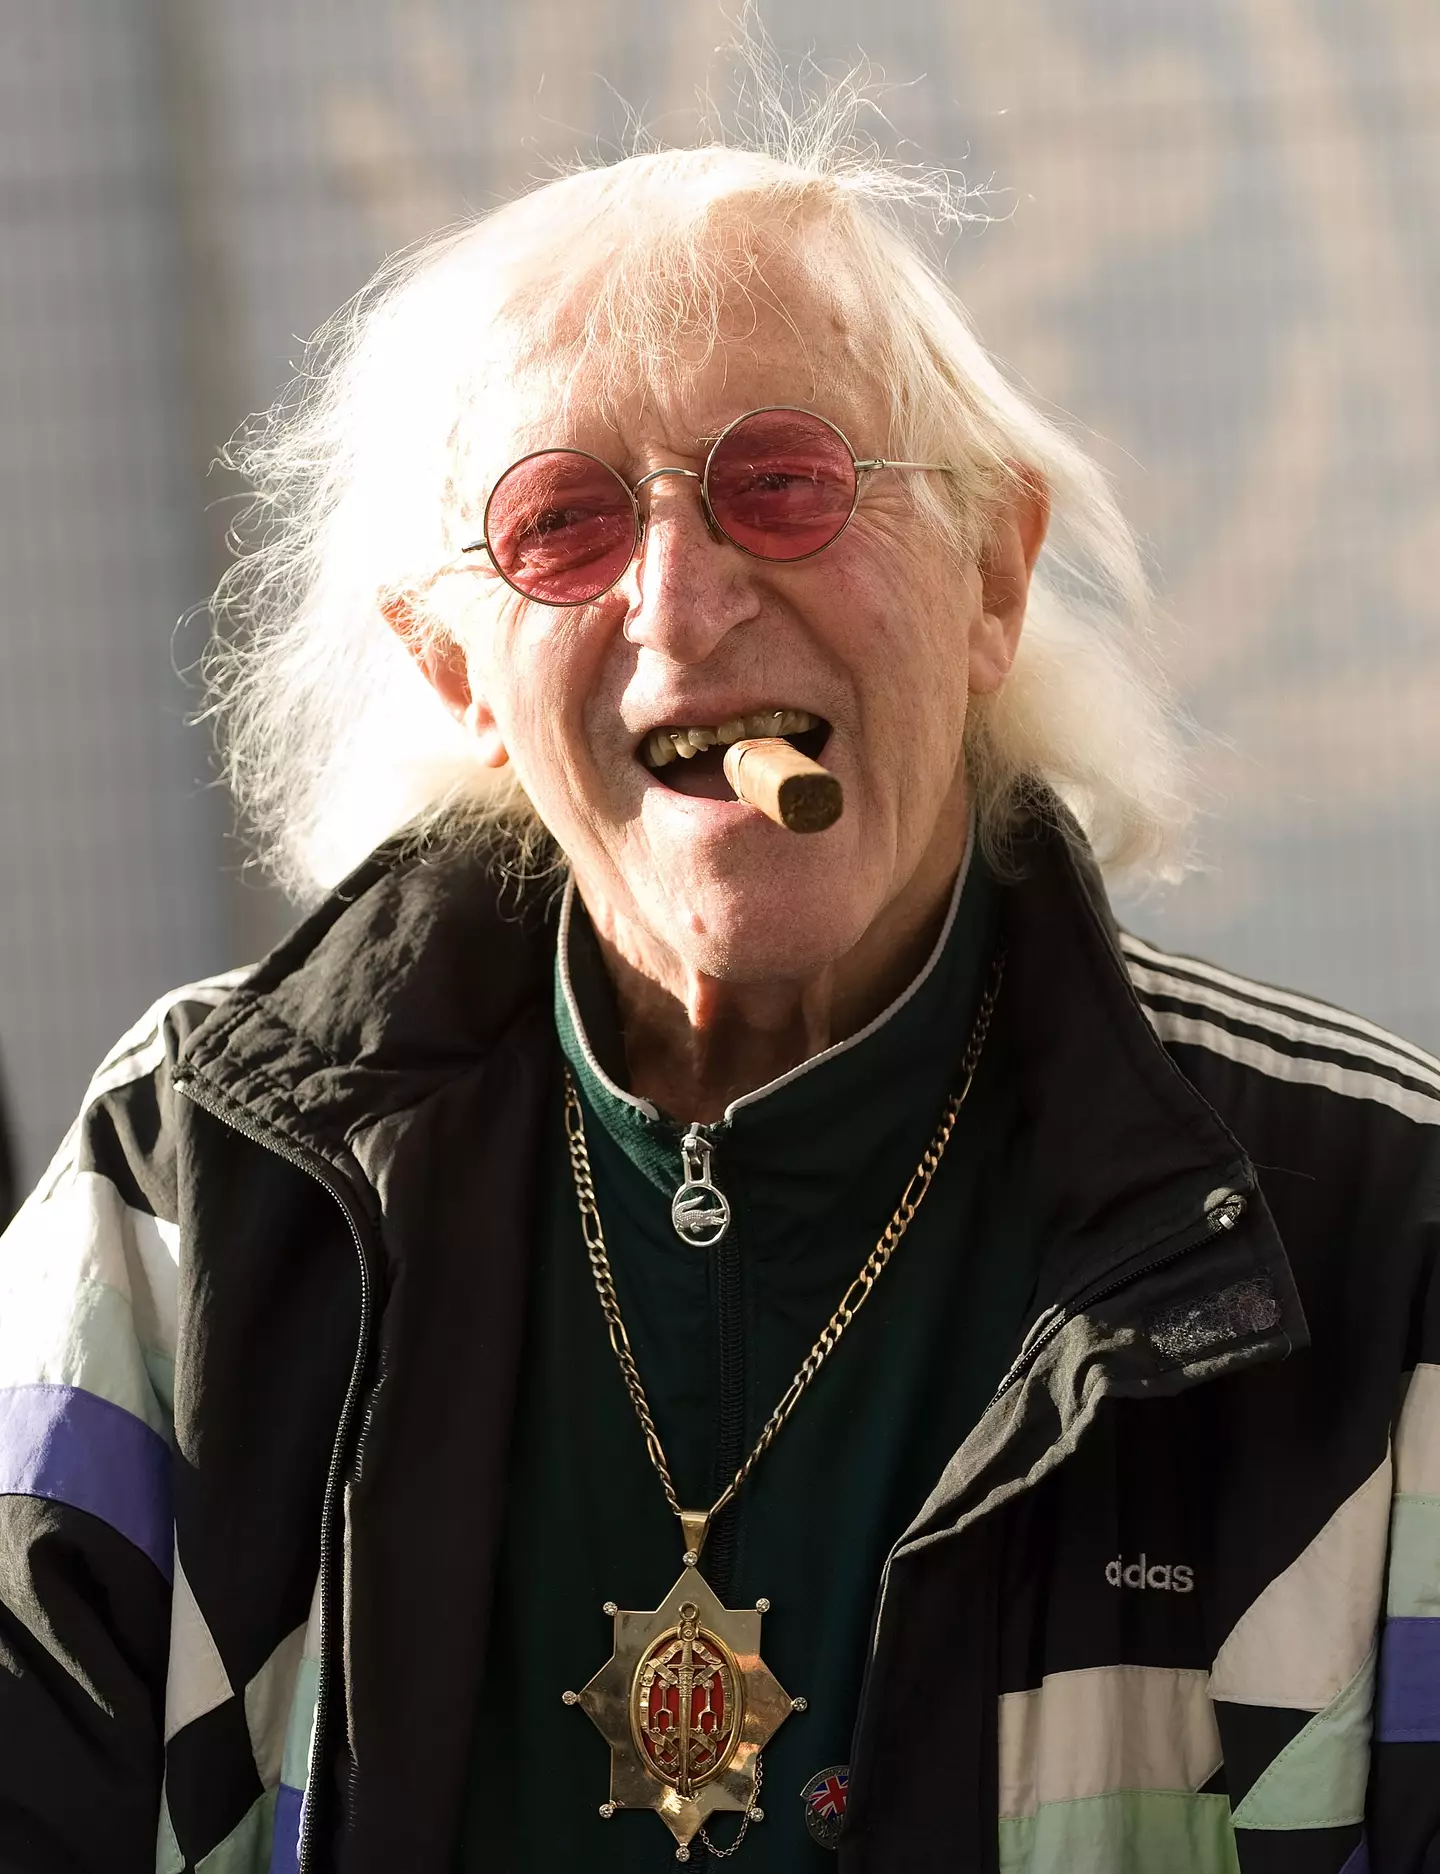 Savile's crimes didn't come to light until after his death in 2011 at the age of 84.